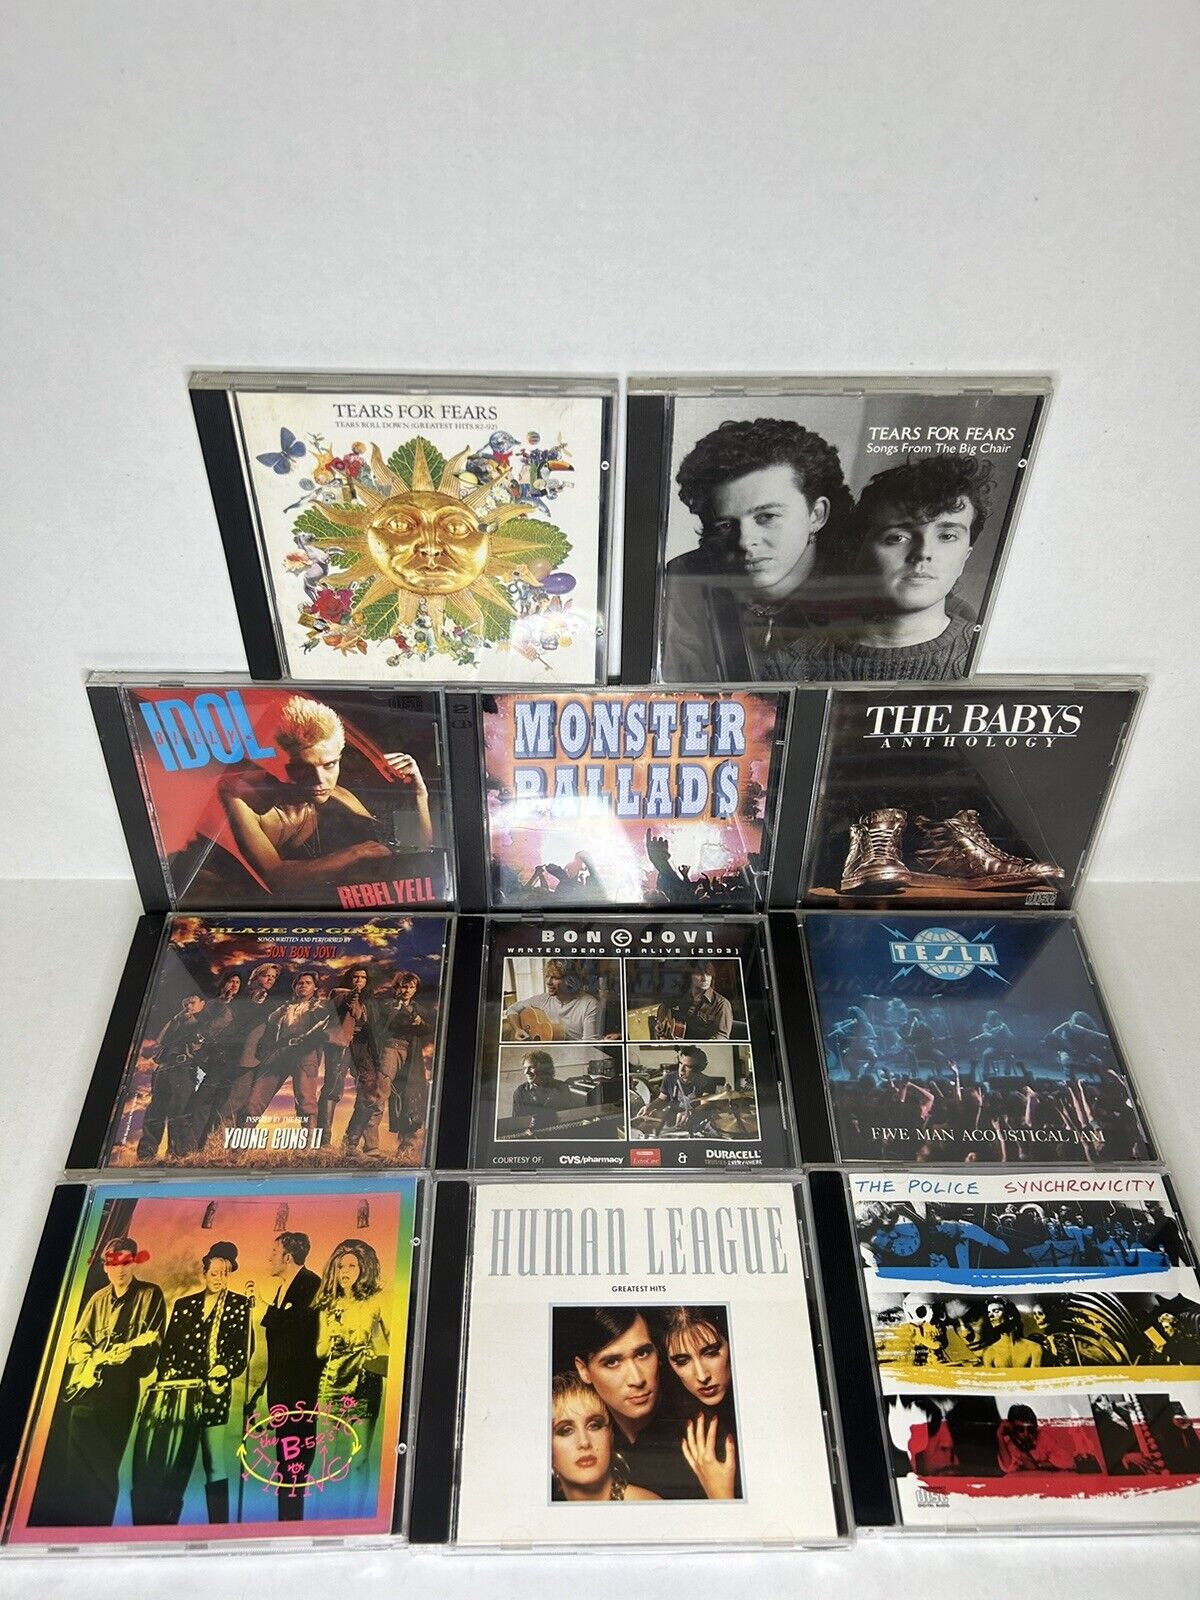 CD Lot of 11 80s Tears for Fears Billy Idol Monster Ballads The Babys B52s Human